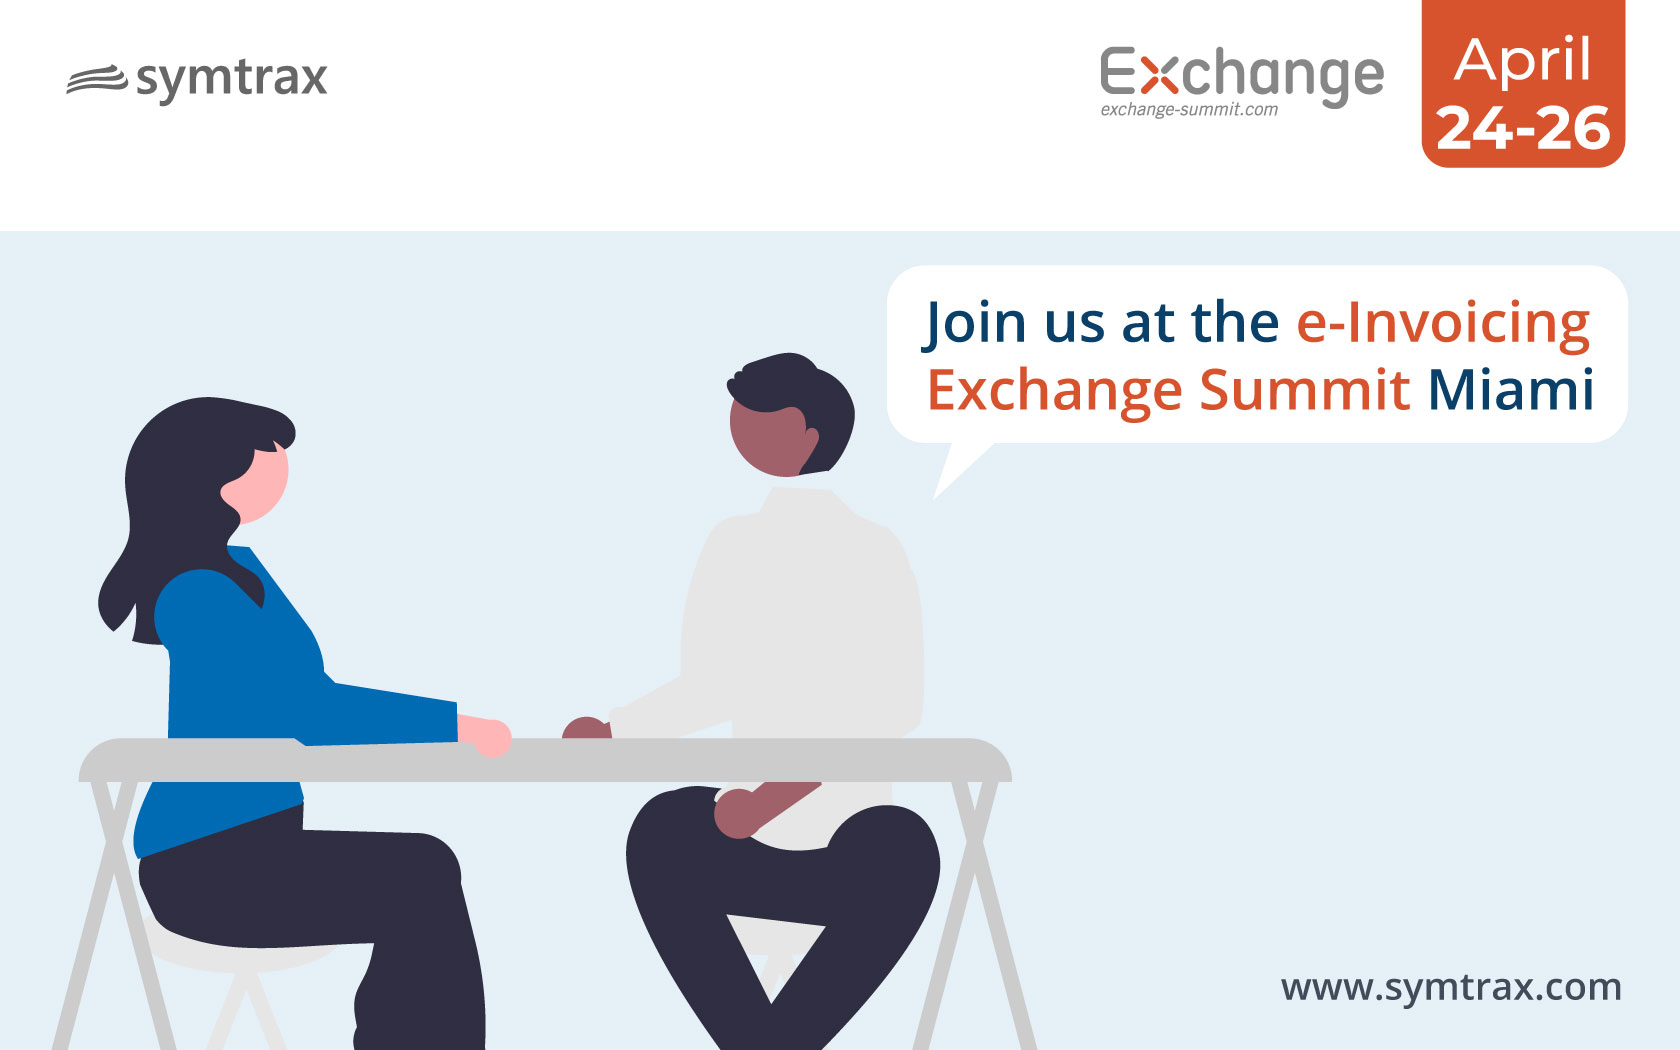 symtrax is attending the E-INVOICING EXCHANGE SUMMIT MIAMI